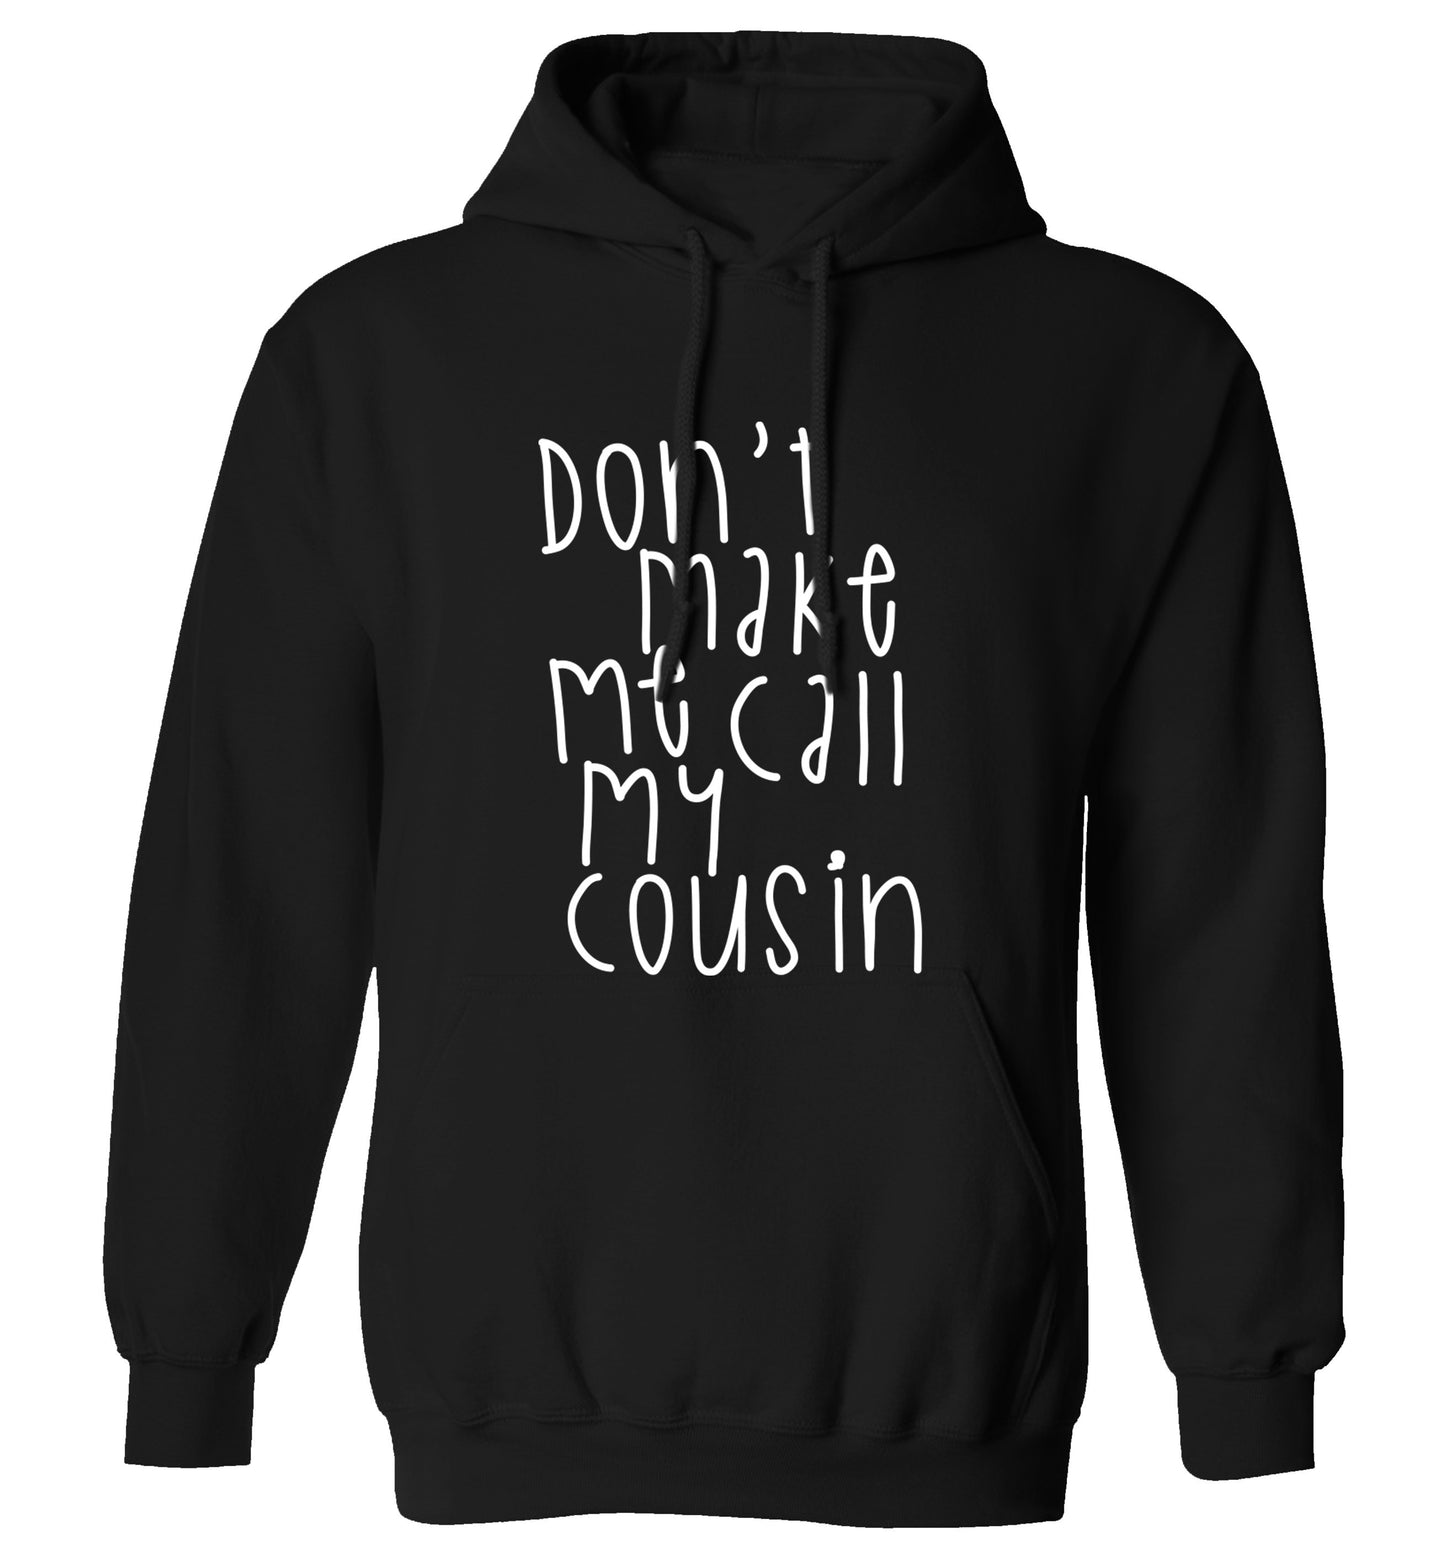 Don't make me call my cousin adults unisex black hoodie 2XL